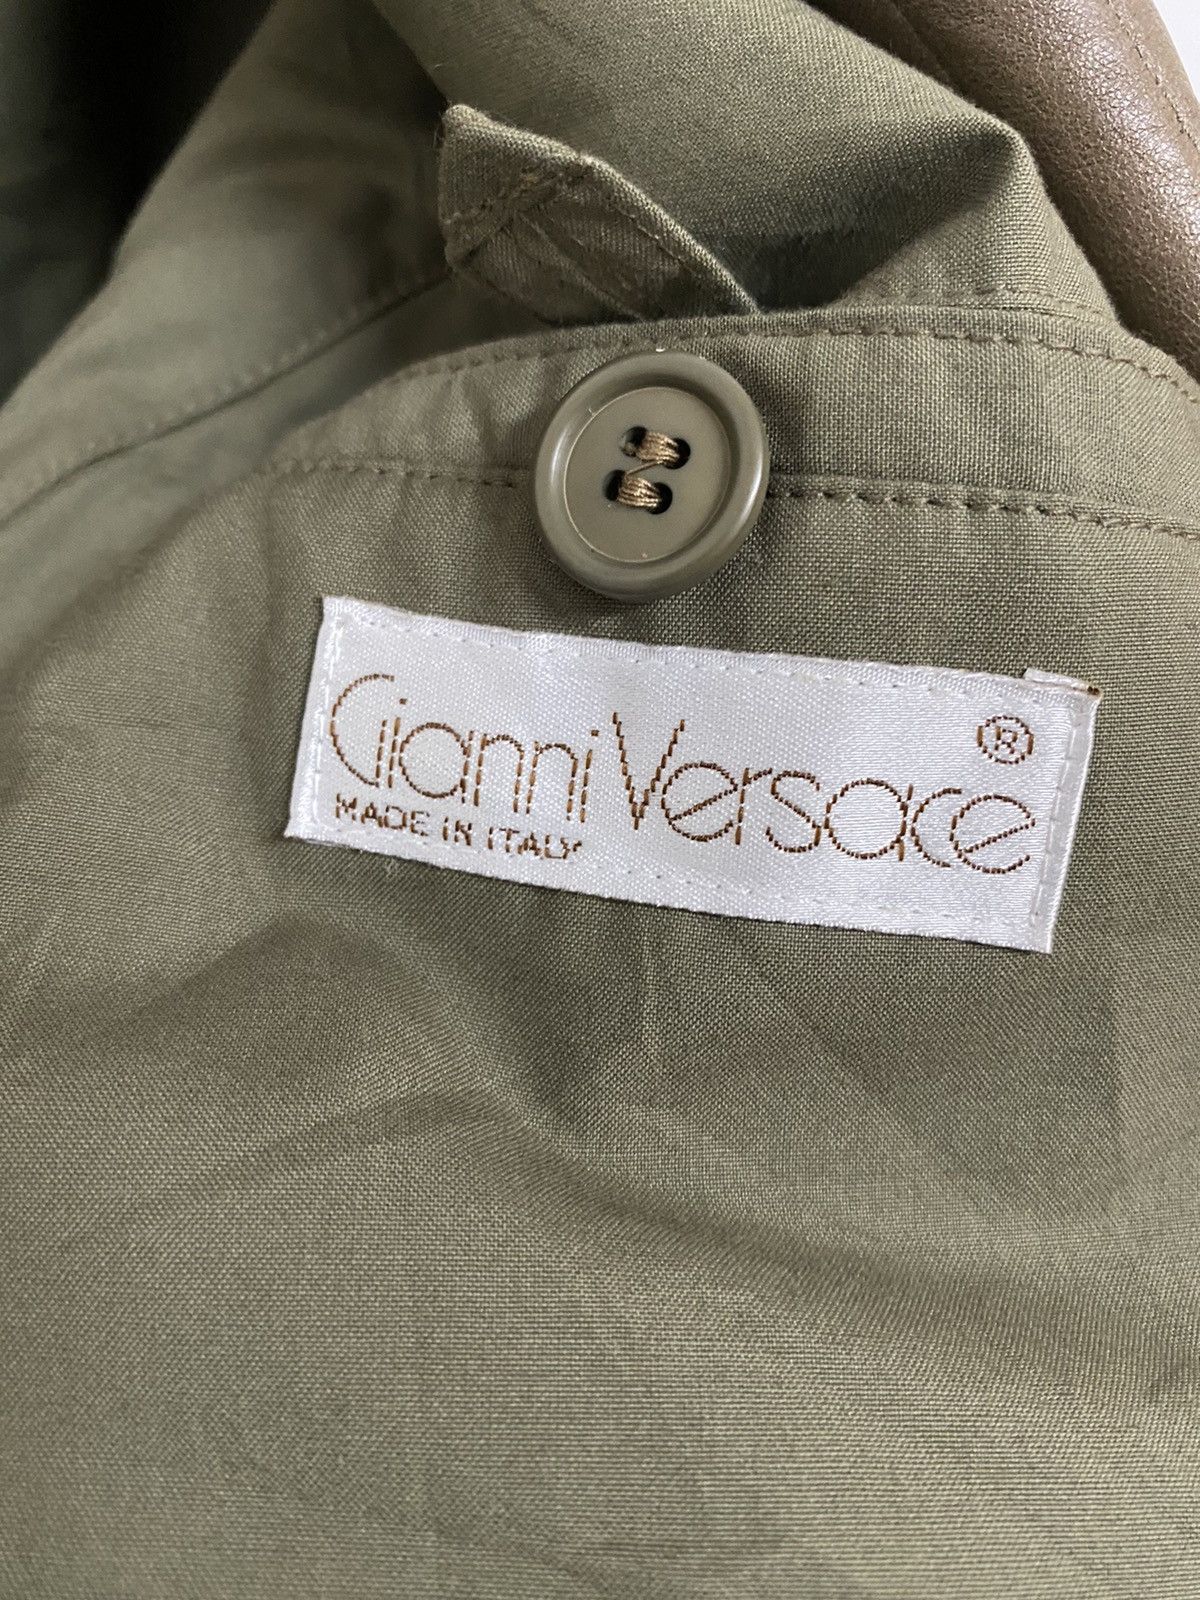 Rare🔥Vintage Gianni Versace Jacket Made in Italy - 10